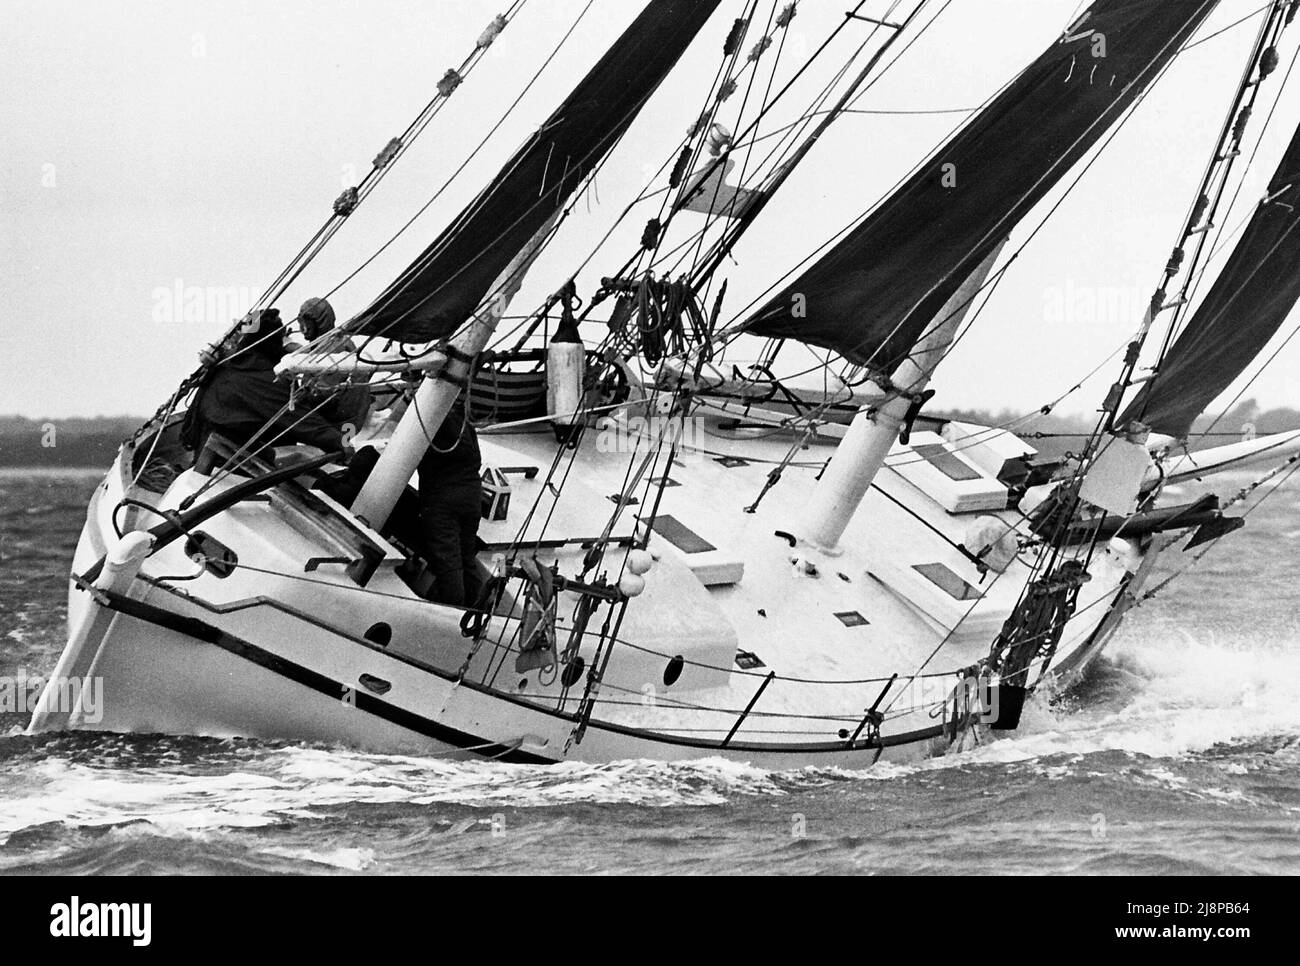 AJAXNETPHOTO. 16TH SEPTEMBER, 1977. SOLENT, ENGLAND. - OLD GAFFERS RACE - THE YACHT VENUS DESIGNED AND BUILT BY PAUL ERLING JOHNSON, IN HEAVY WEATHER DURING THE ANNUAL SOLENT CLASSIC RACE FOR GAFF RIGGED YACHTS. YACHT WAS LATER LOST OFF NORTH COAST OF AUSTRALIA.PHOTO:JONATHAN EASTLAND/AJAX REF:771609 57 Stock Photo